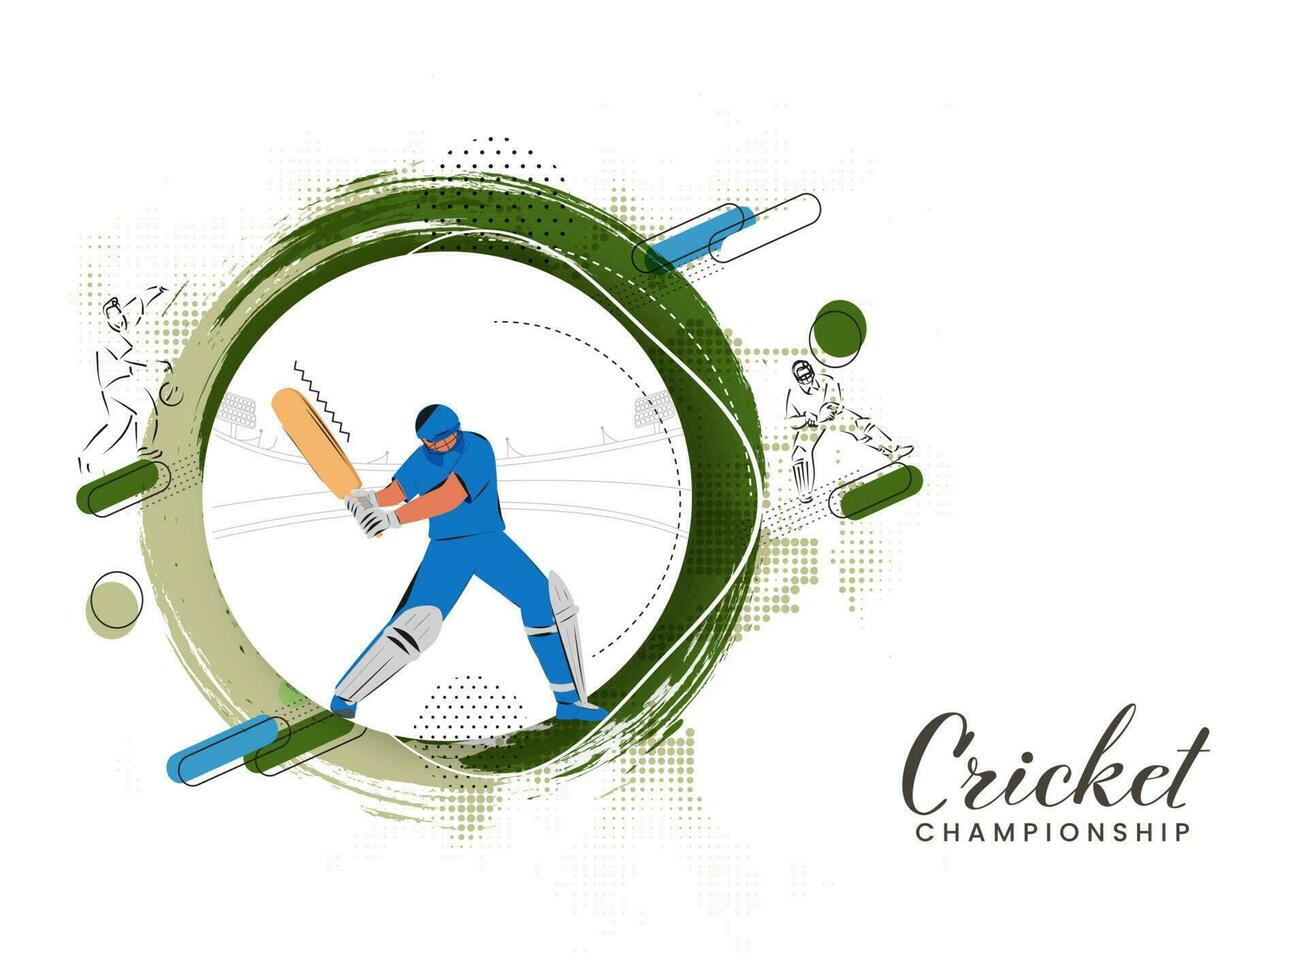 Cricket Championship Concept With Batsman Player In Playing Pose And Brush Effect Halftone On White Background. vector